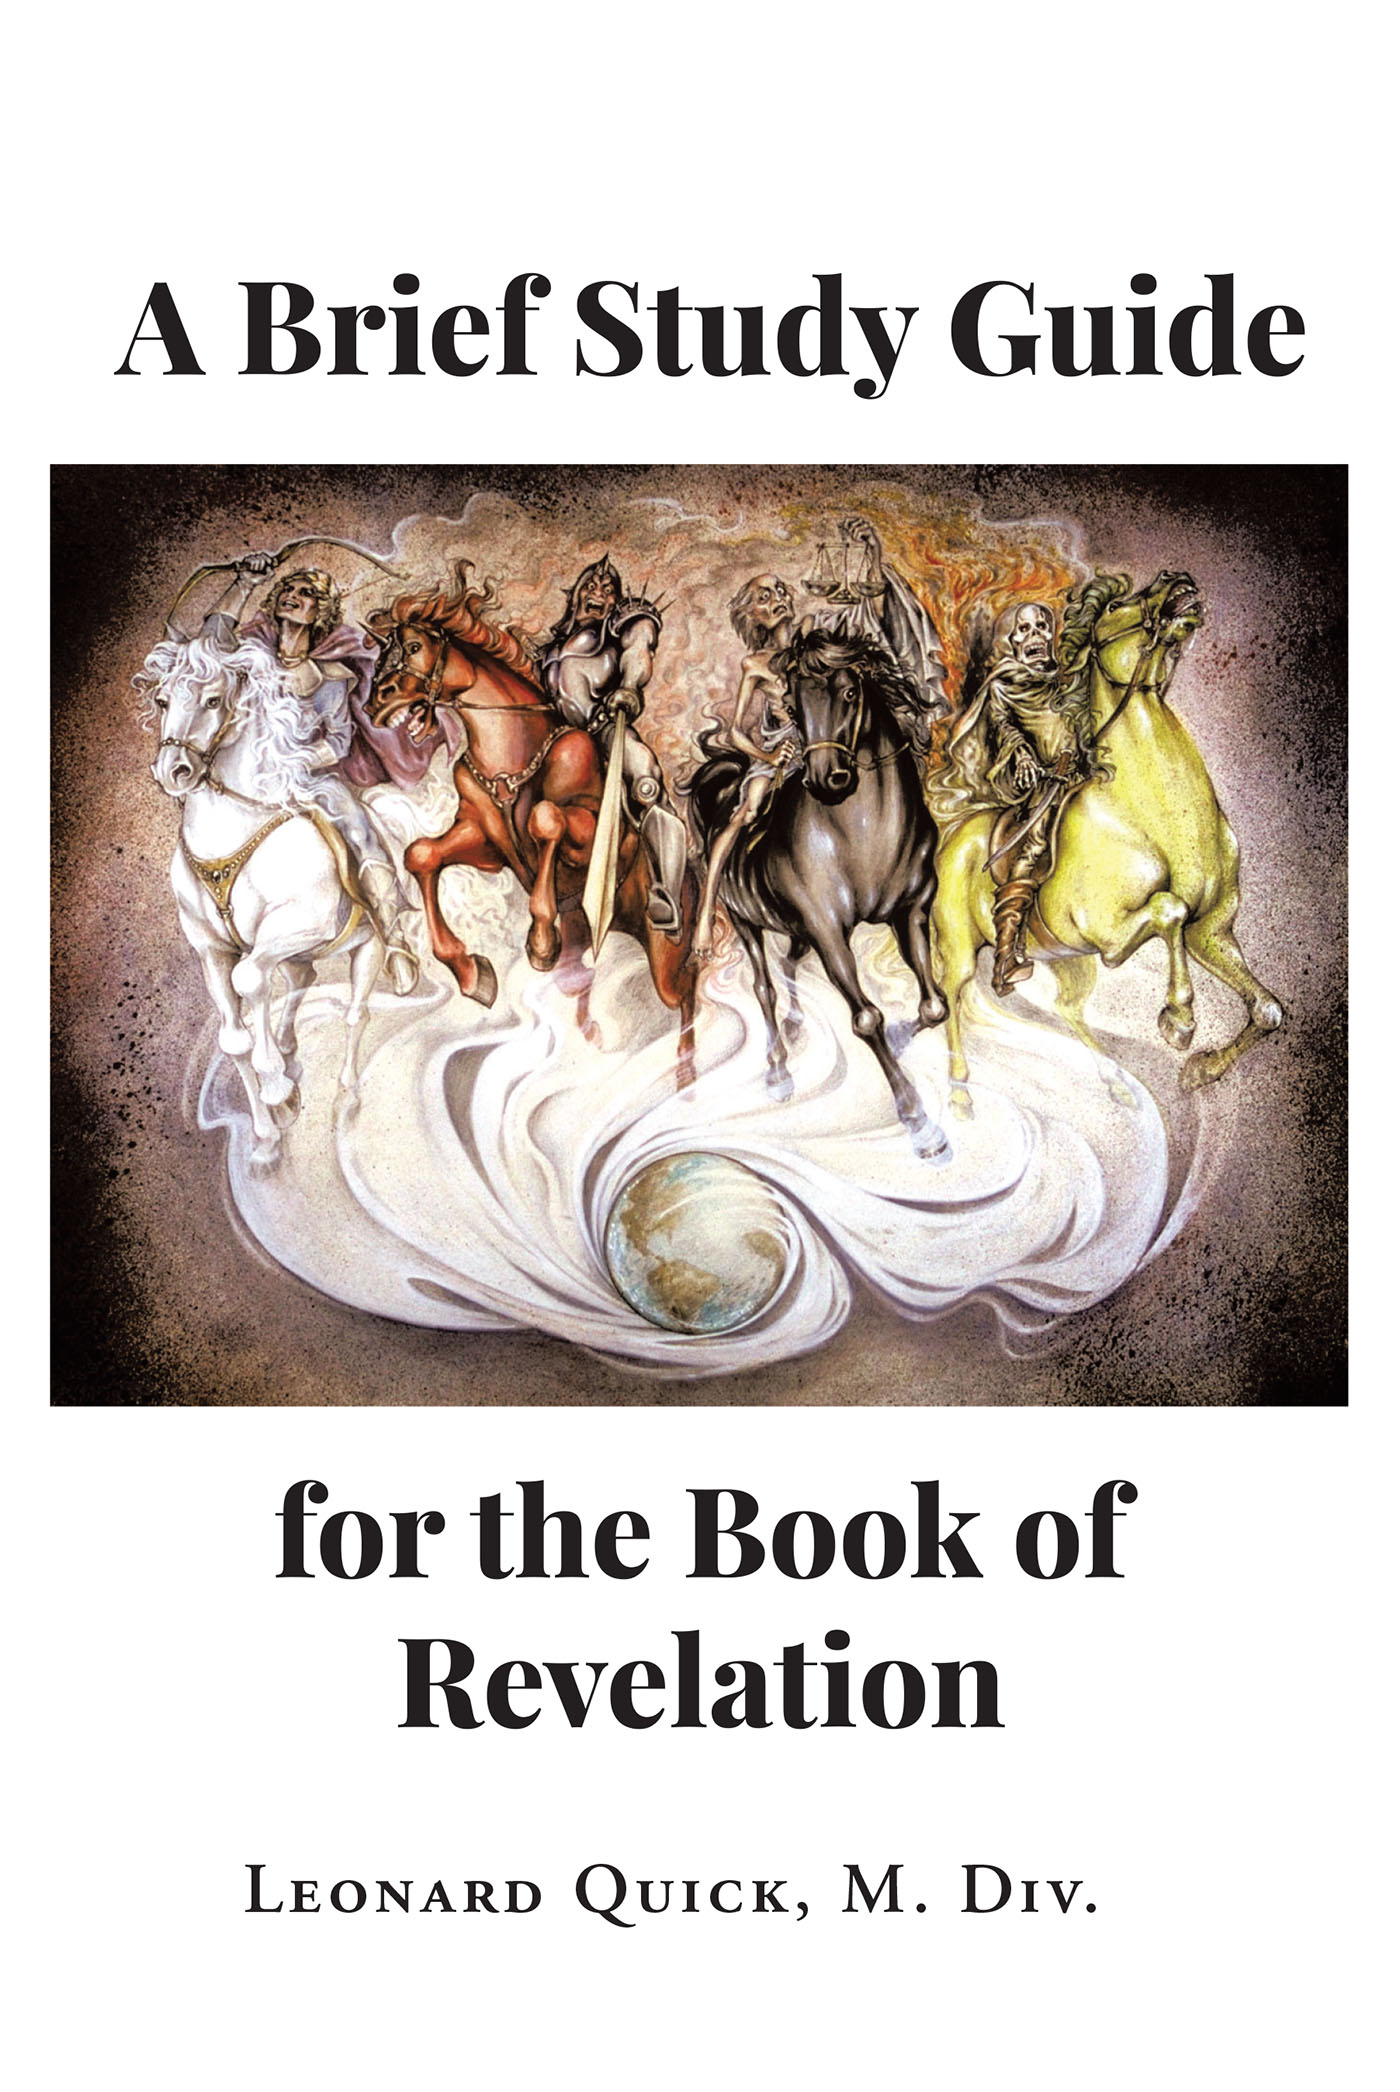 Leonard Quick, M. Div.’s Newly Released "A Brief Study Guide for the Book of Revelation" is a Compelling Eschatological Study